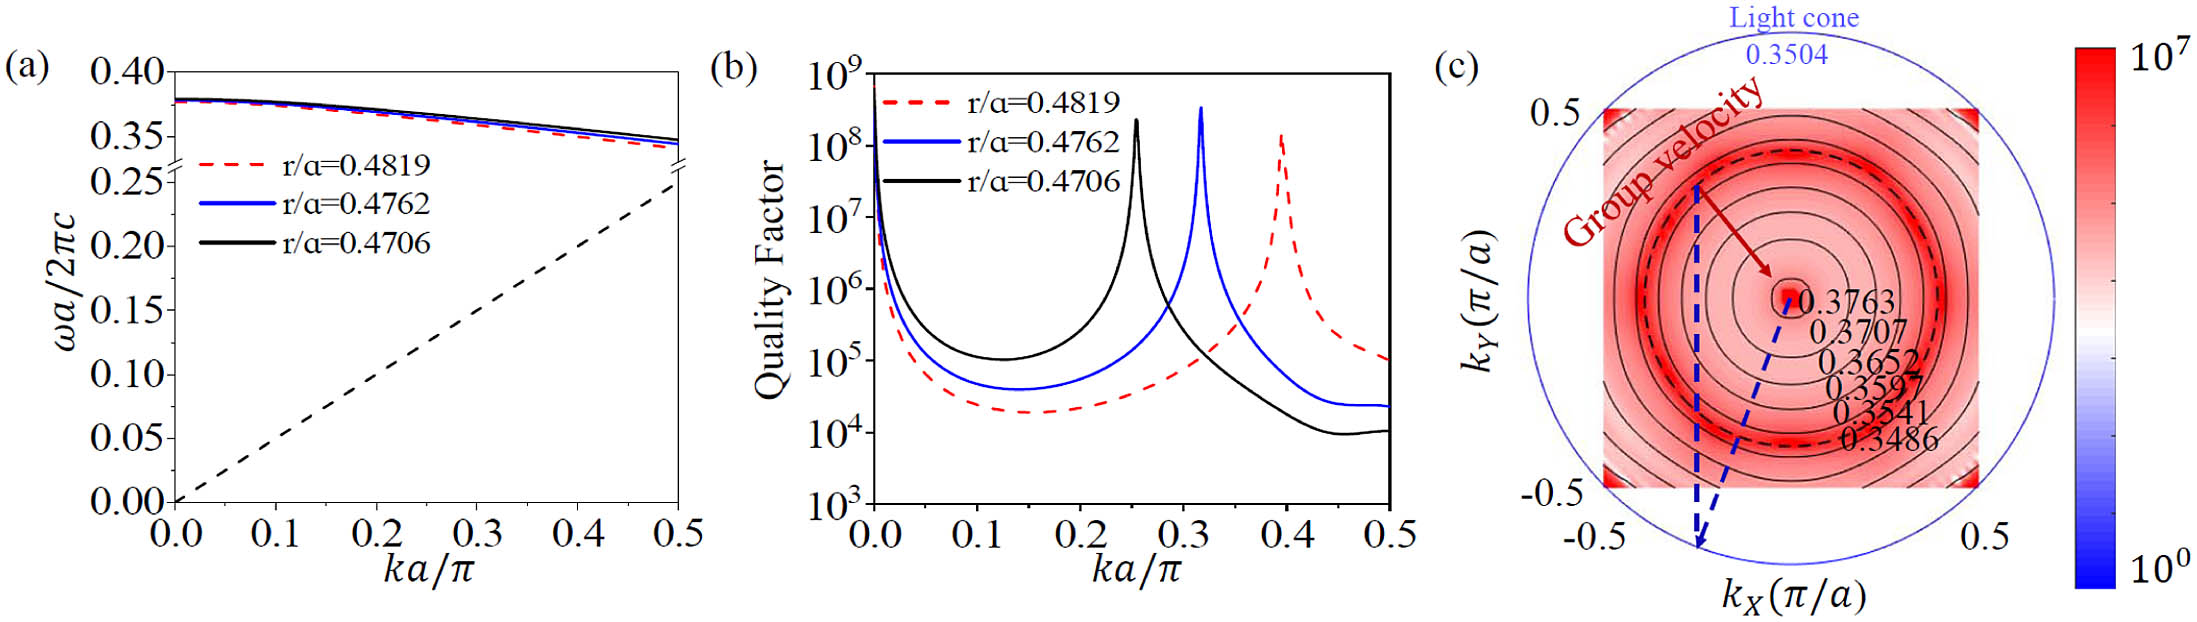 (a) Dispersion properties of PhC slab along the Γ-M direction for three different lattice constants, where the r/a is indicated in the legend. The light cone (black dashed line) is also presented. (b) The corresponding Q factors for the modes shown in (a). (c) The calculated EFCs and the corresponding Q factors of a square region within the first Brillouin zone. The light cone (a/λ=0.3504) is indicated by the blue solid circle. The EFCs for different modes at the same band are marked in the figure, while the color code represents the corresponding Q factors. The blue dashed arrow shows the k-vector of the incident plane wave from air, while the red solid arrow corresponds to the group velocity of the mode excited in the PhC slab. The vertical dashed line indicates the preservation of momentum during refraction.